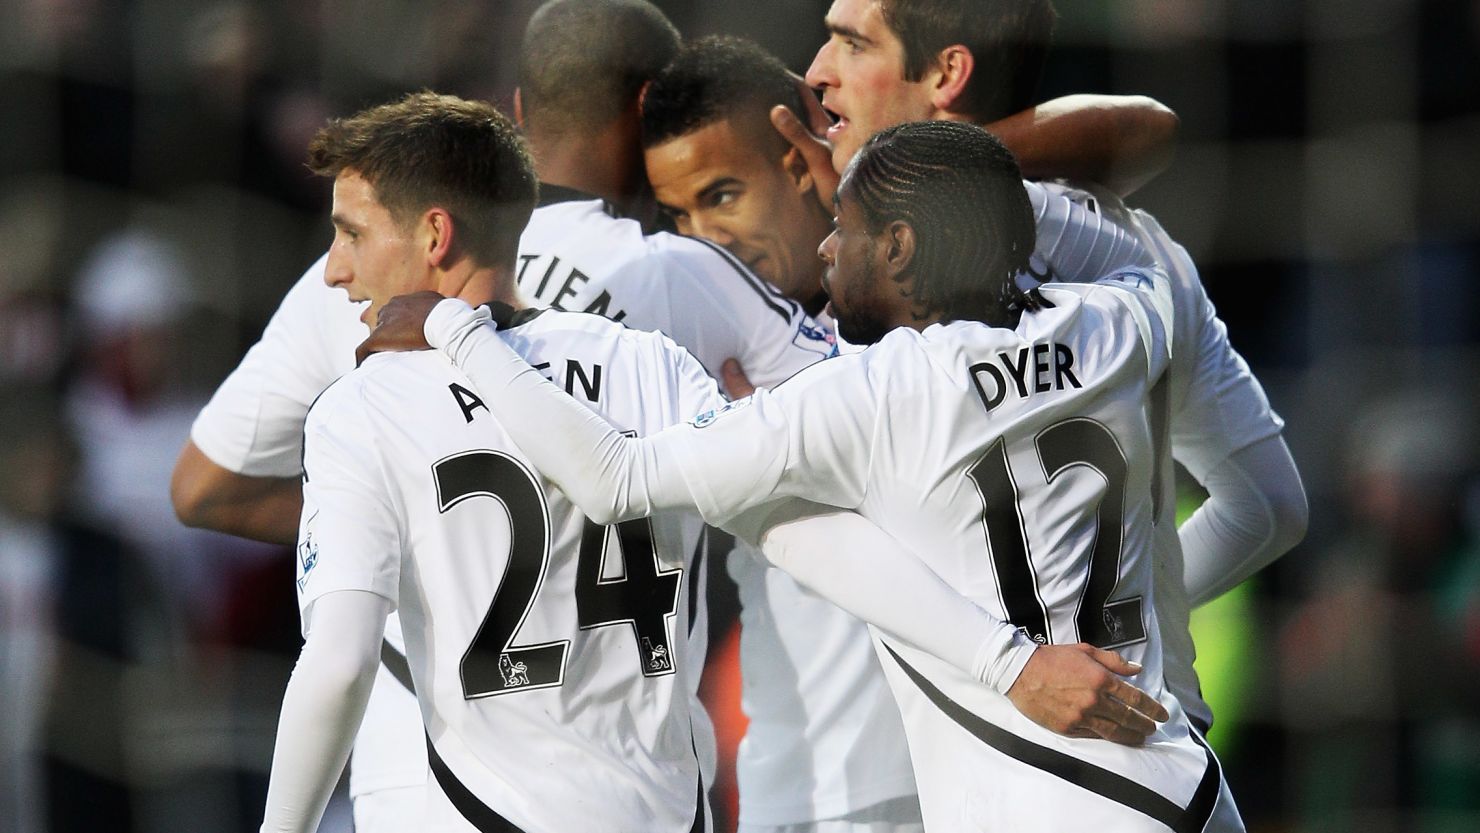 Swansea players congratulate Scott Sinclair after his equalizing goal against Arsenal.